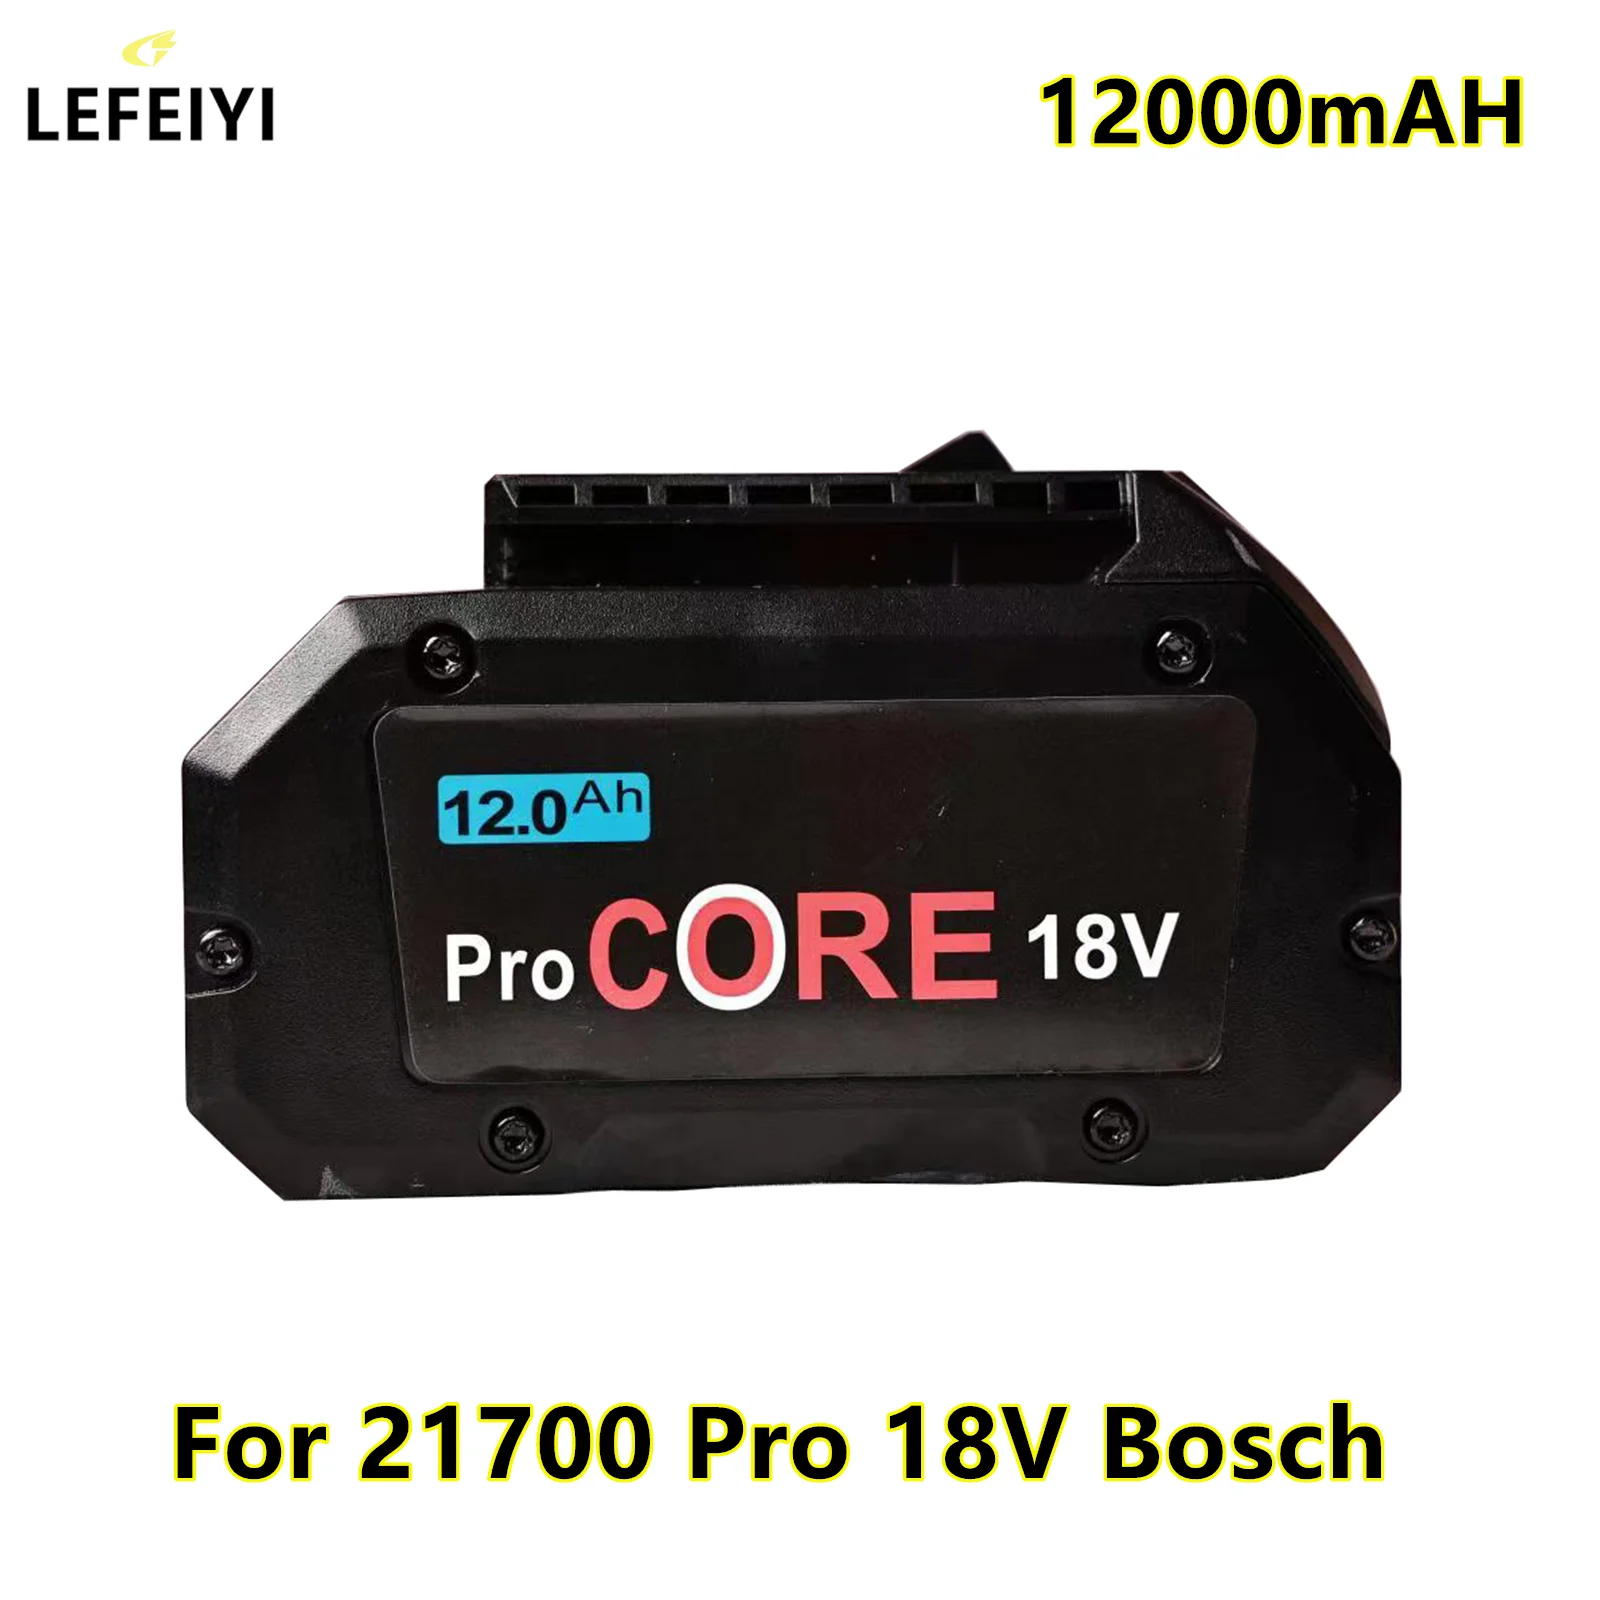 

18V 12000mAh ProCORE Replacement Battery,for Bosch 18V Professional Cordless Tools BAT609 BAT618 GBA18V80 21700 Cell